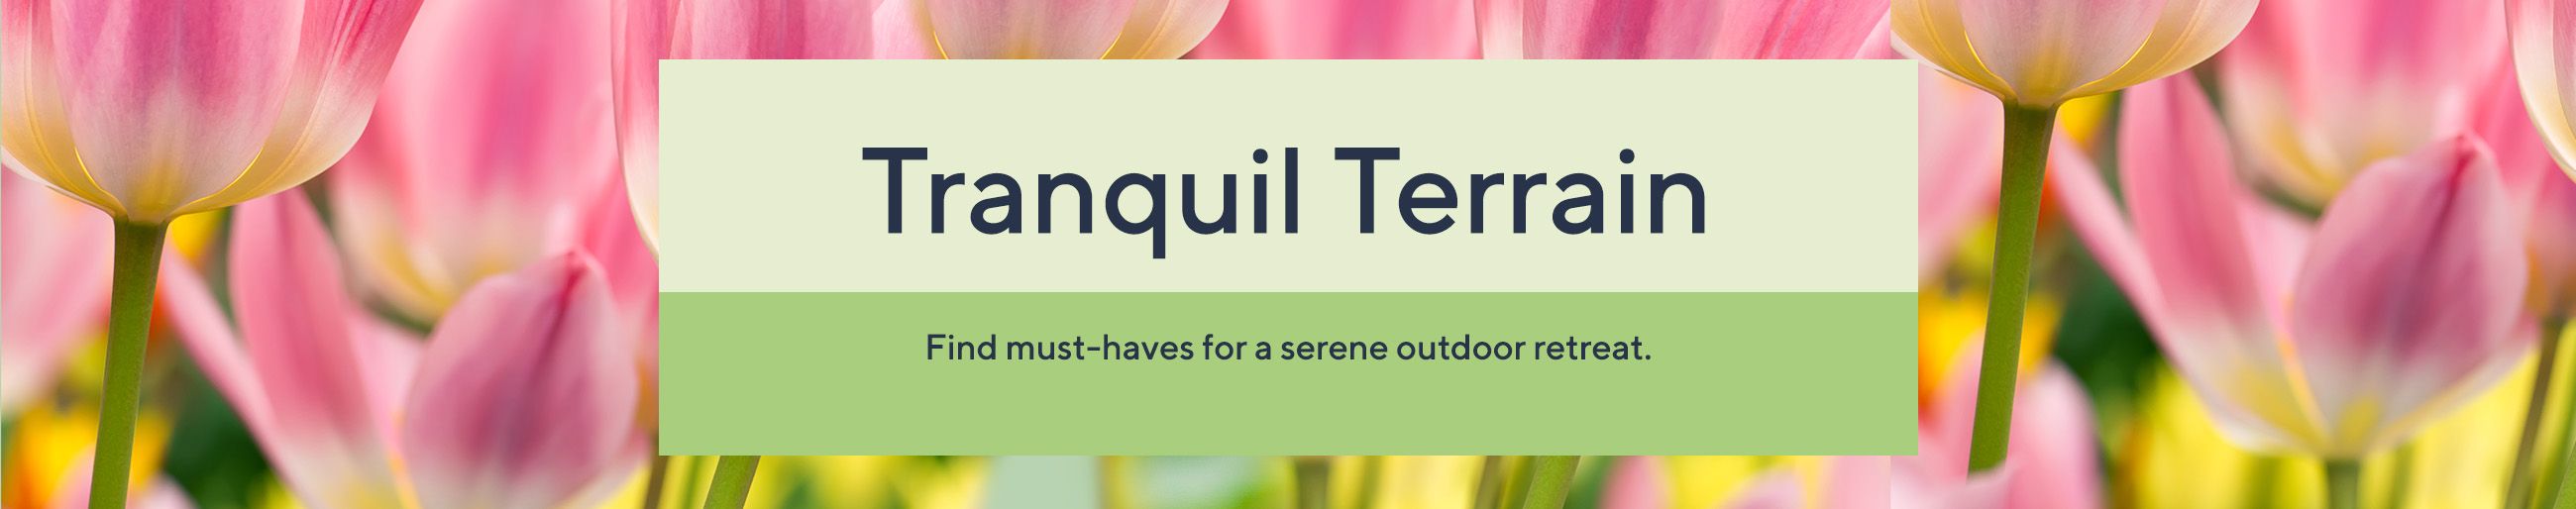 Tranquil Terrain - Find must-haves for a serene outdoor retreat.  